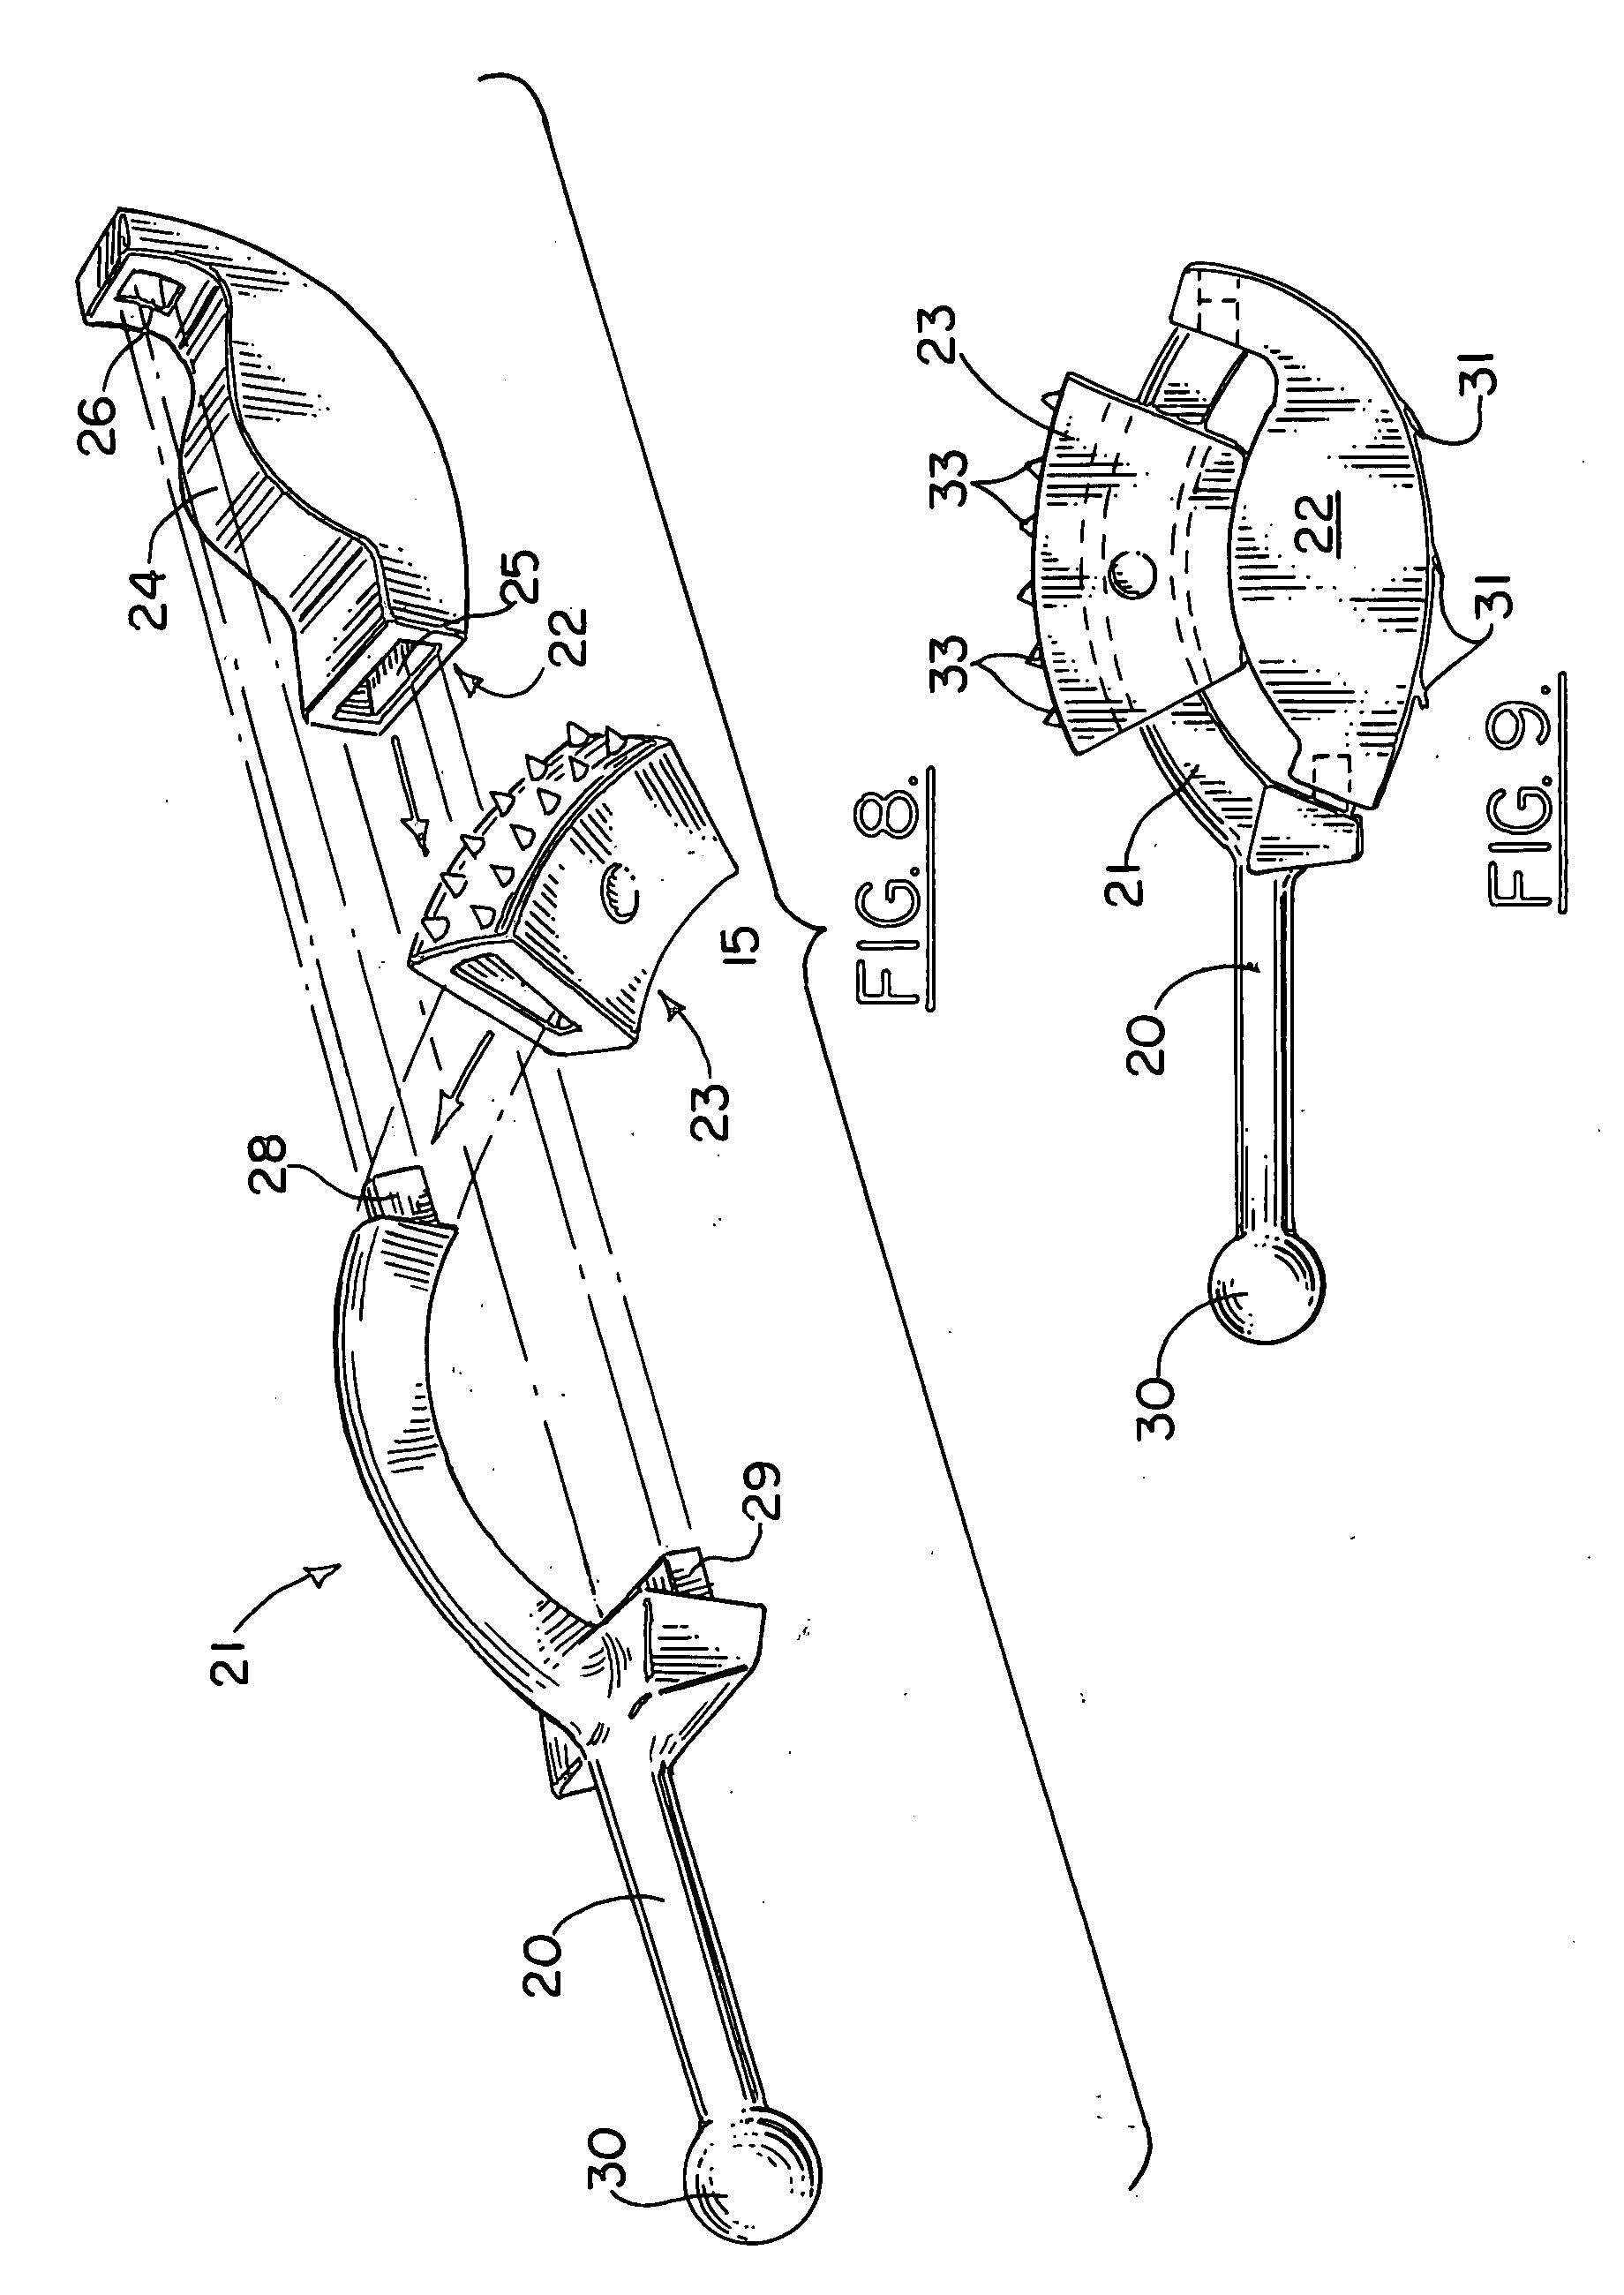 Lumbar disc replacement implant for posterior implantation with dynamic spinal stabilization device and method